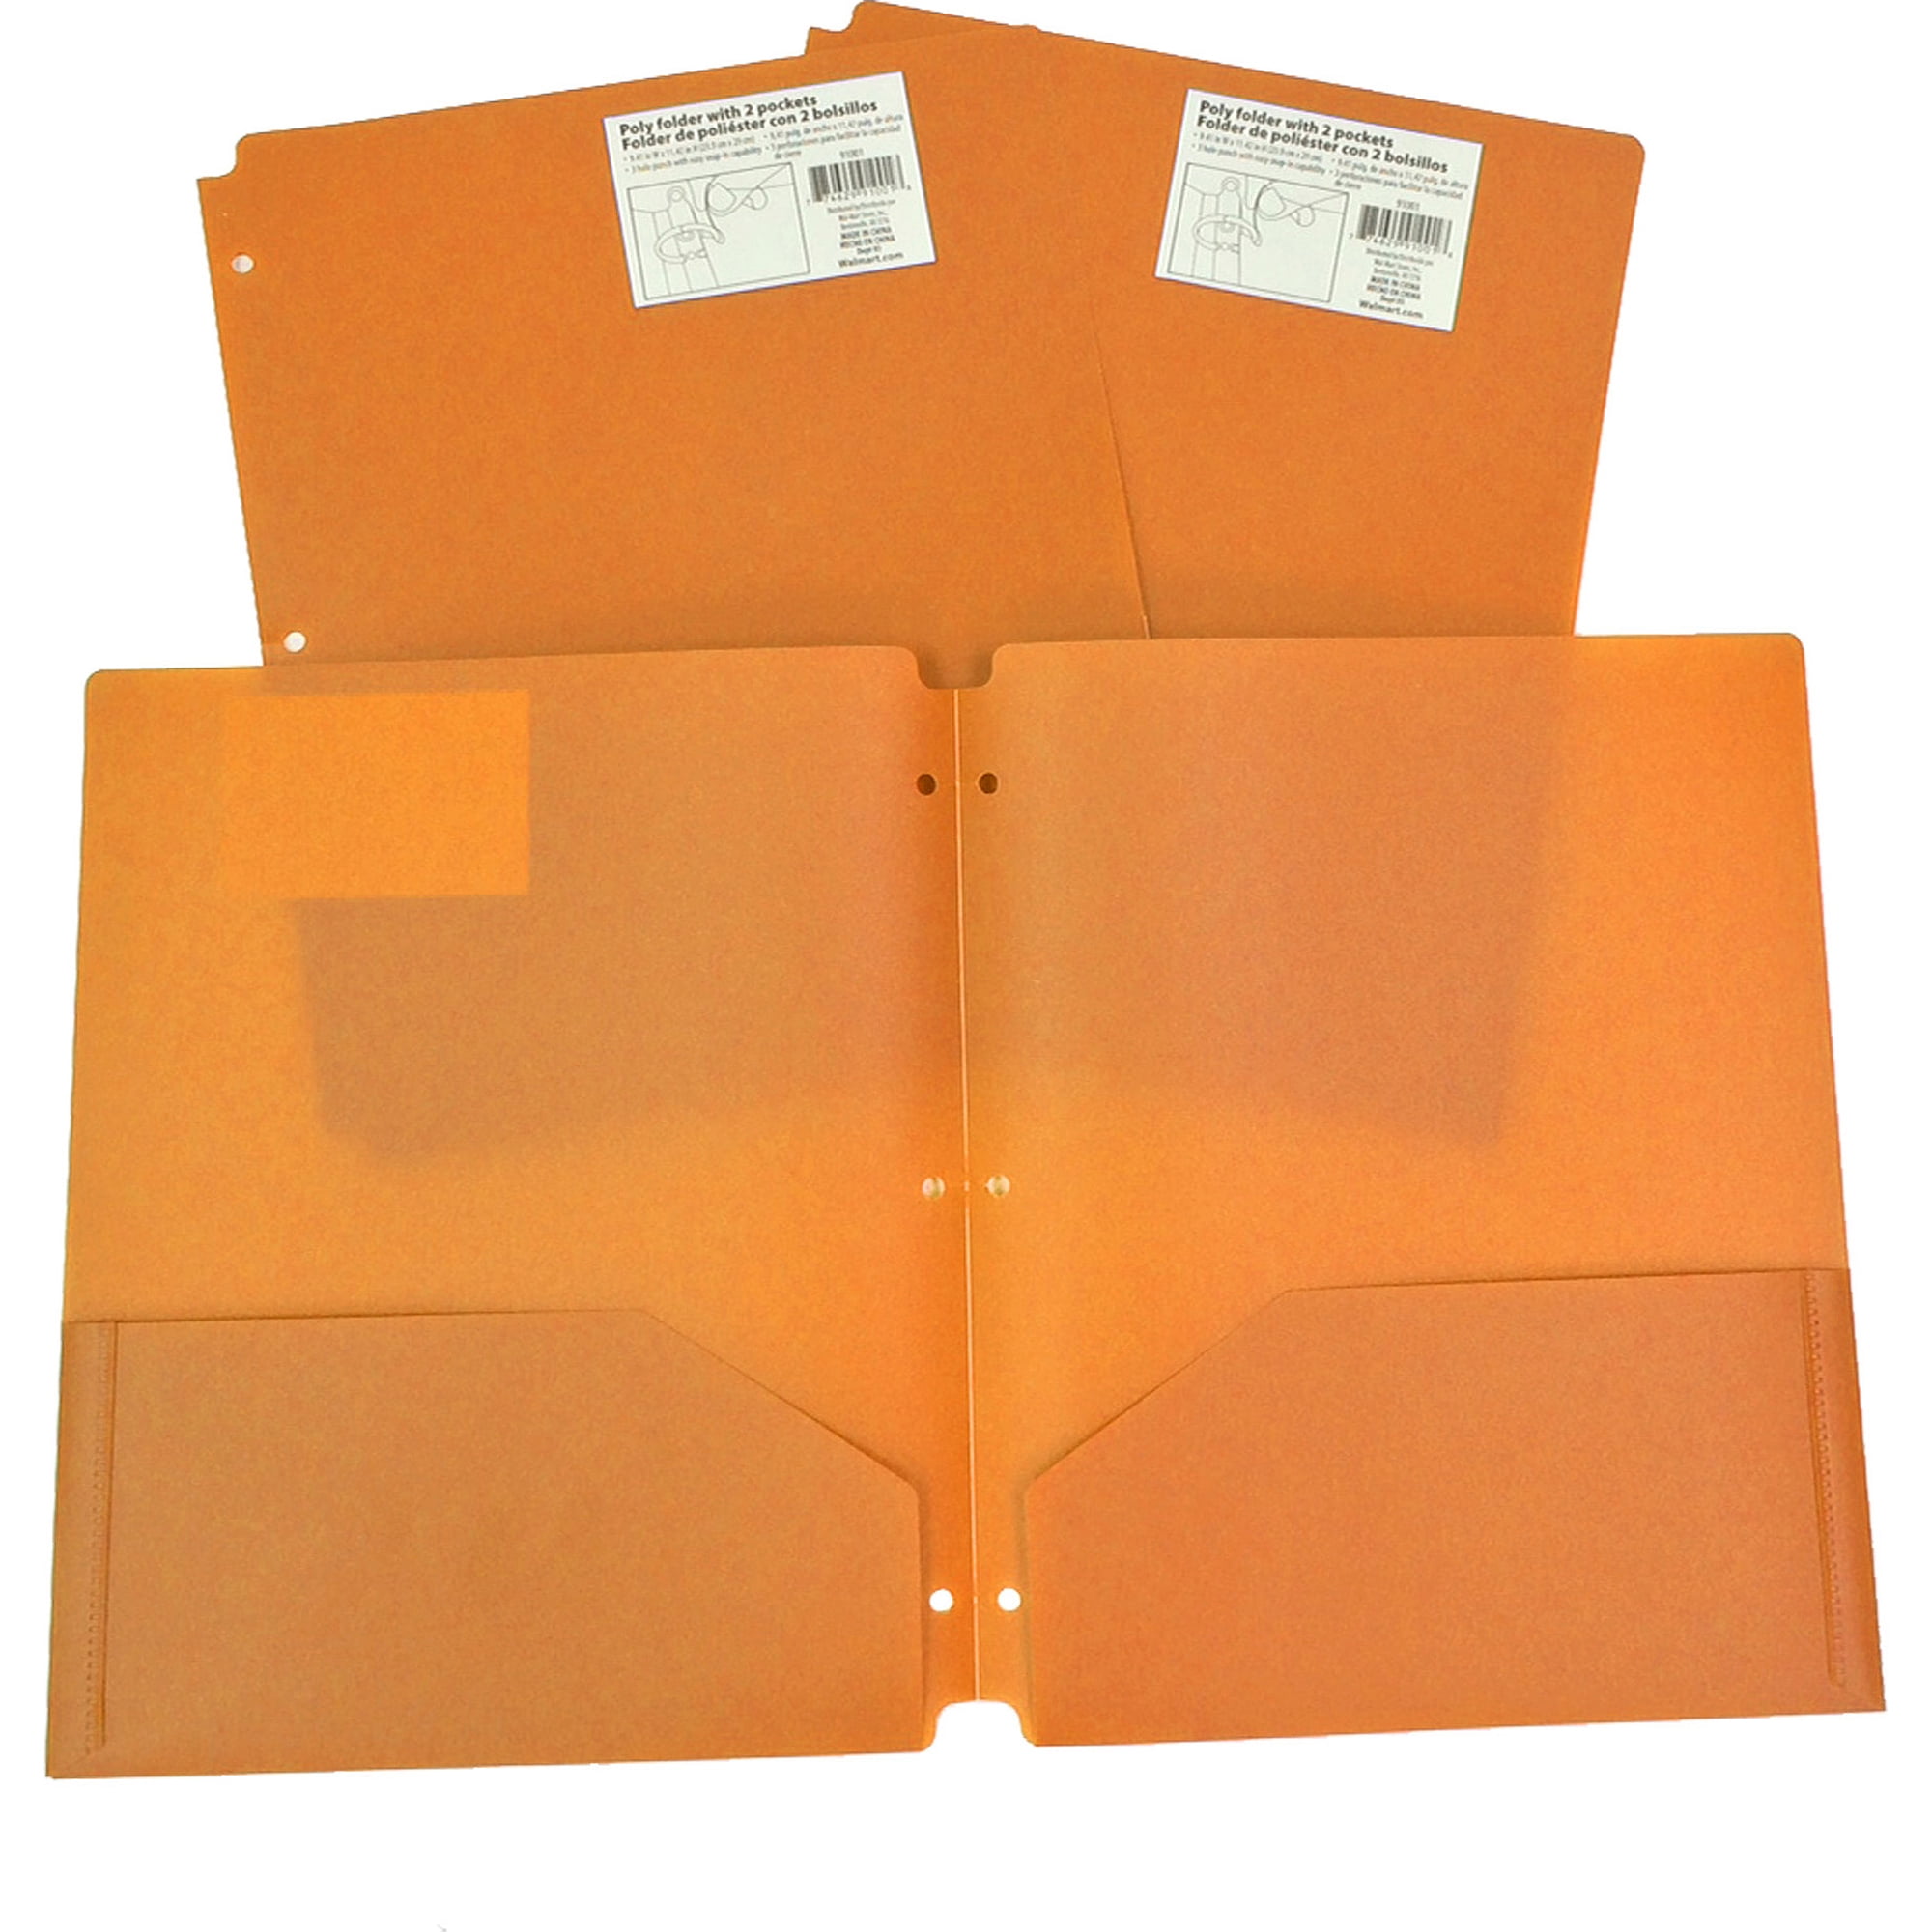 2Pocket Poly Folder, Available in Multiple Colors